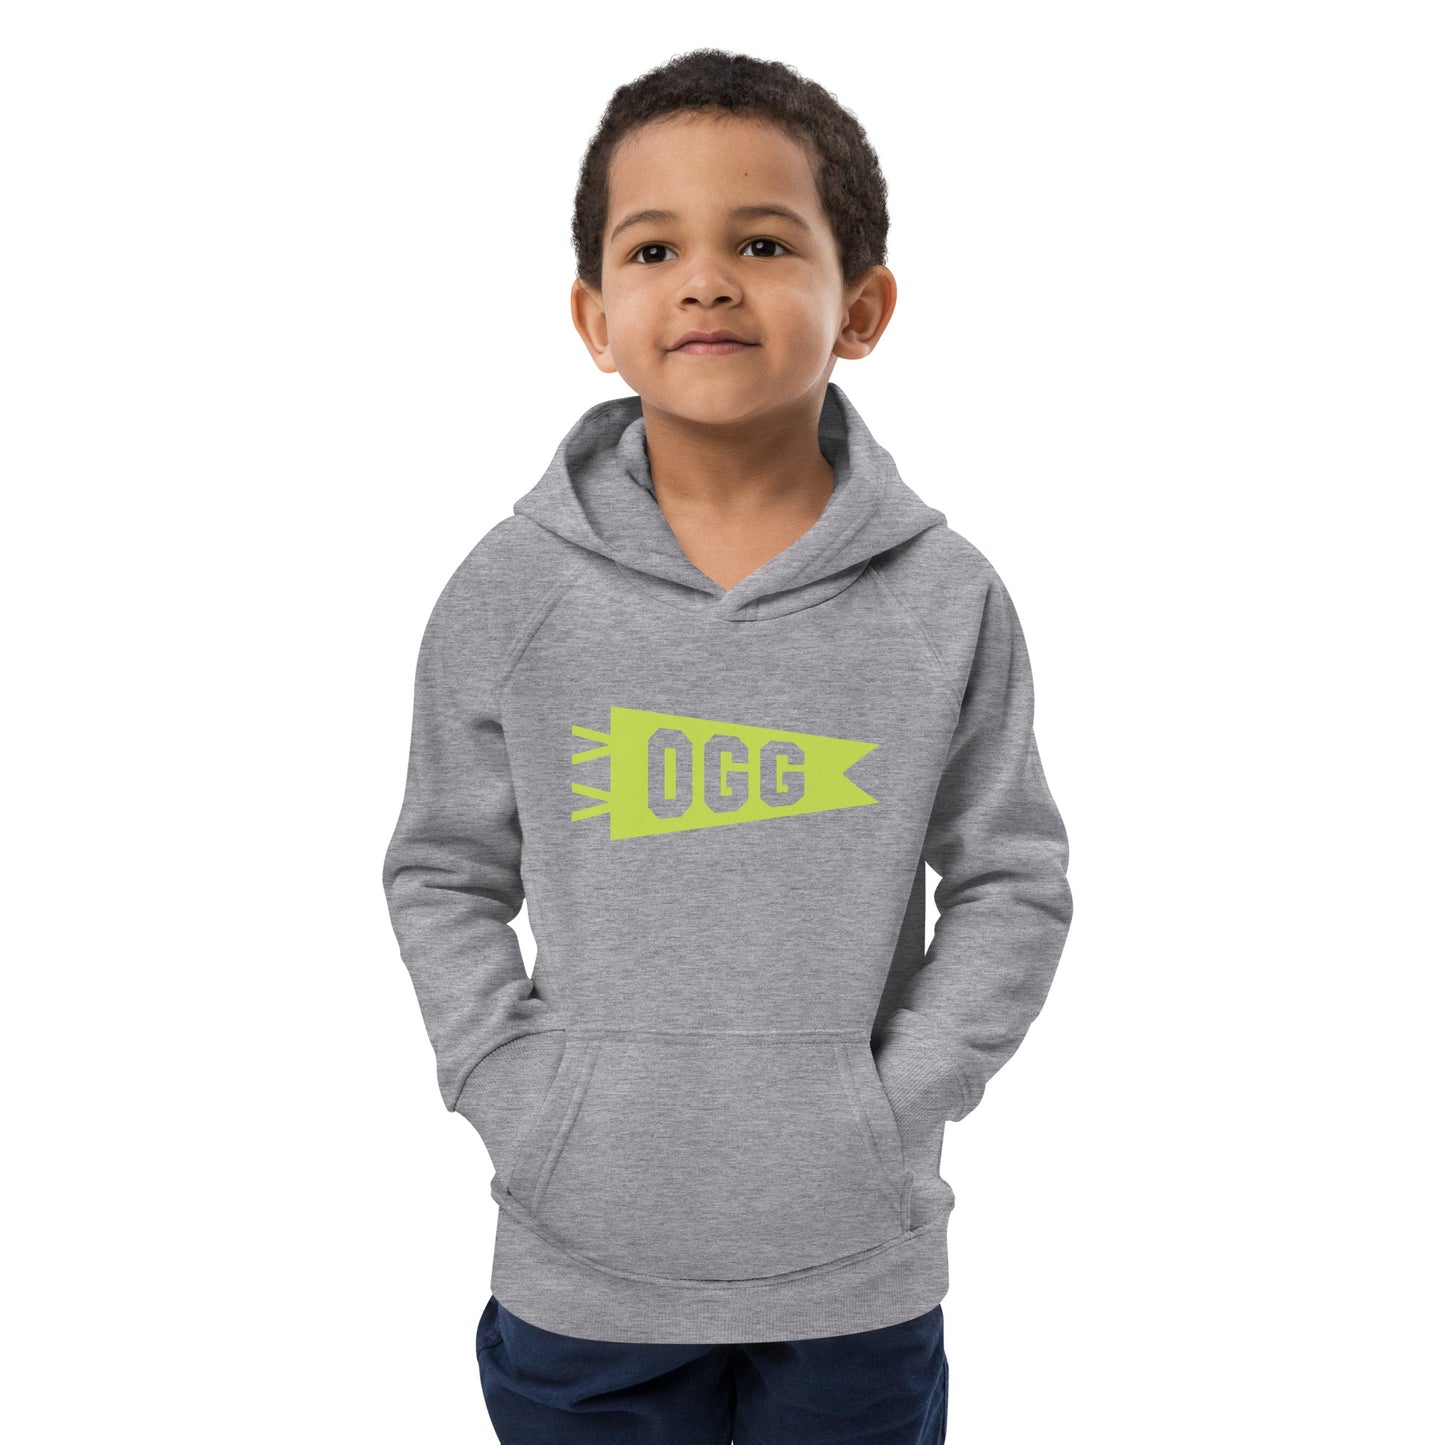 Kid's Sustainable Hoodie - Green Graphic • OGG Maui • YHM Designs - Image 11